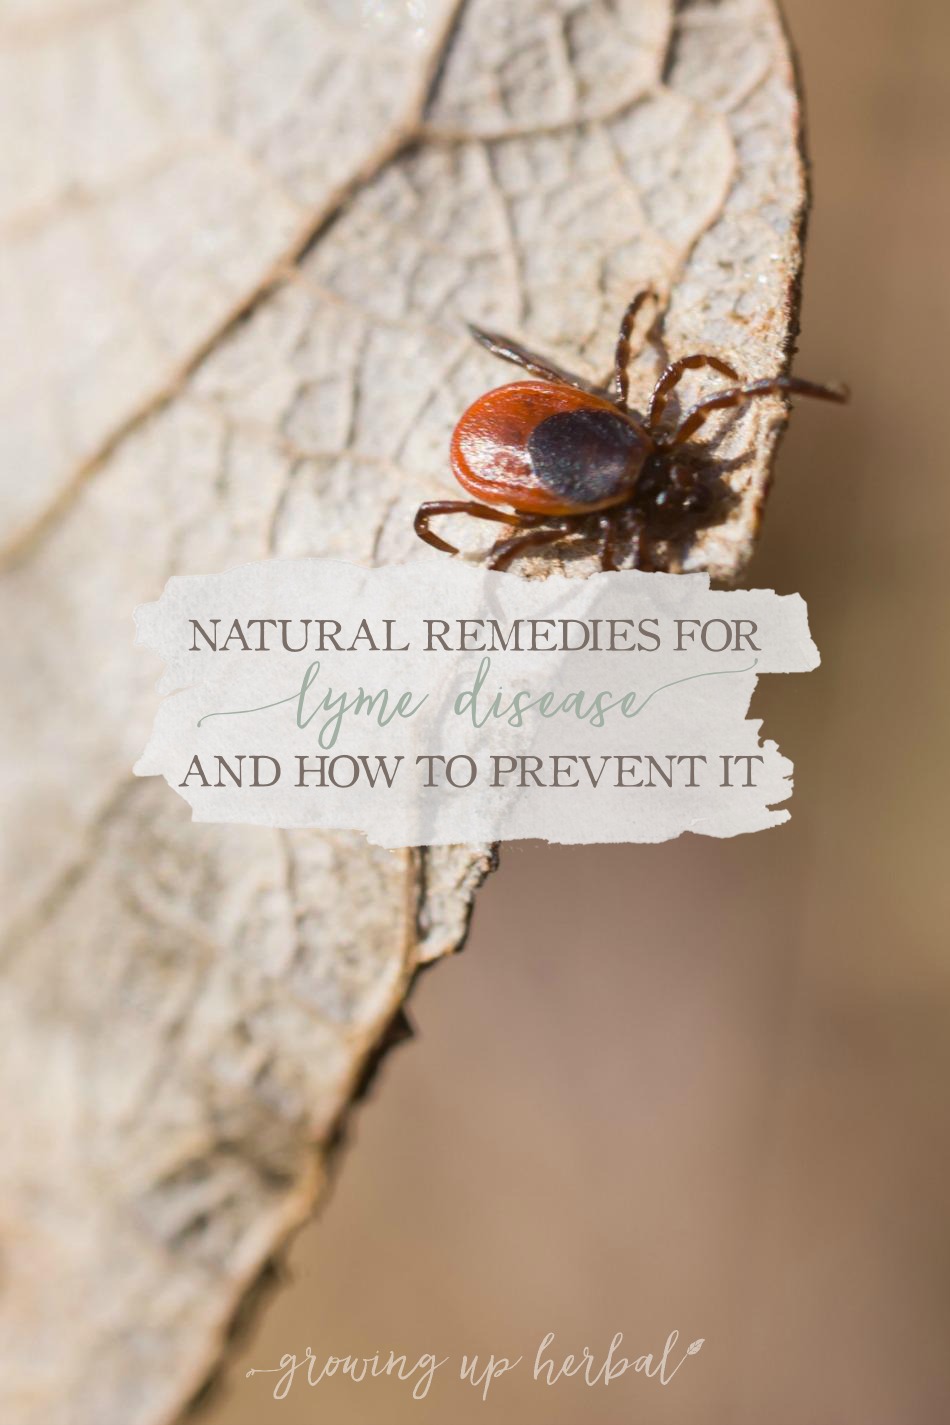 Natural Remedies For Lyme Disease and How To Prevent It | Growing Up Herbal | Concerned about ticks and Lyme disease? Here are some natural remedies and prevention tips to keep your little ones safe this summer.